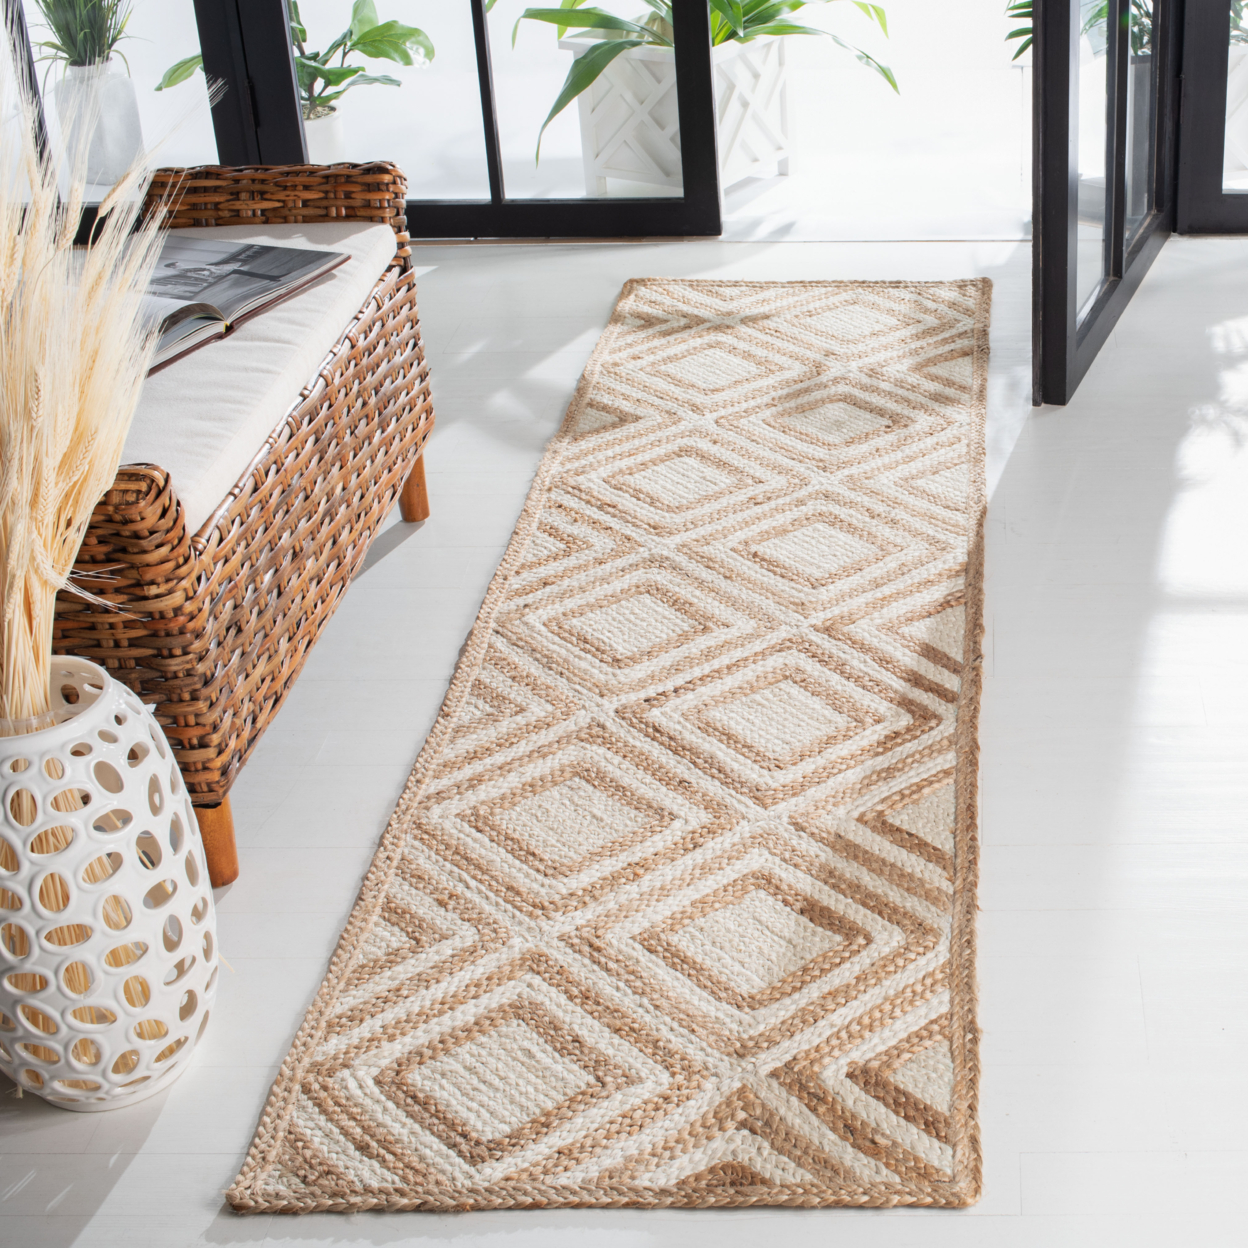 SAFAVIEH Cape Cod CAP304A Handwoven Natural / Ivory Rug - 6' Square